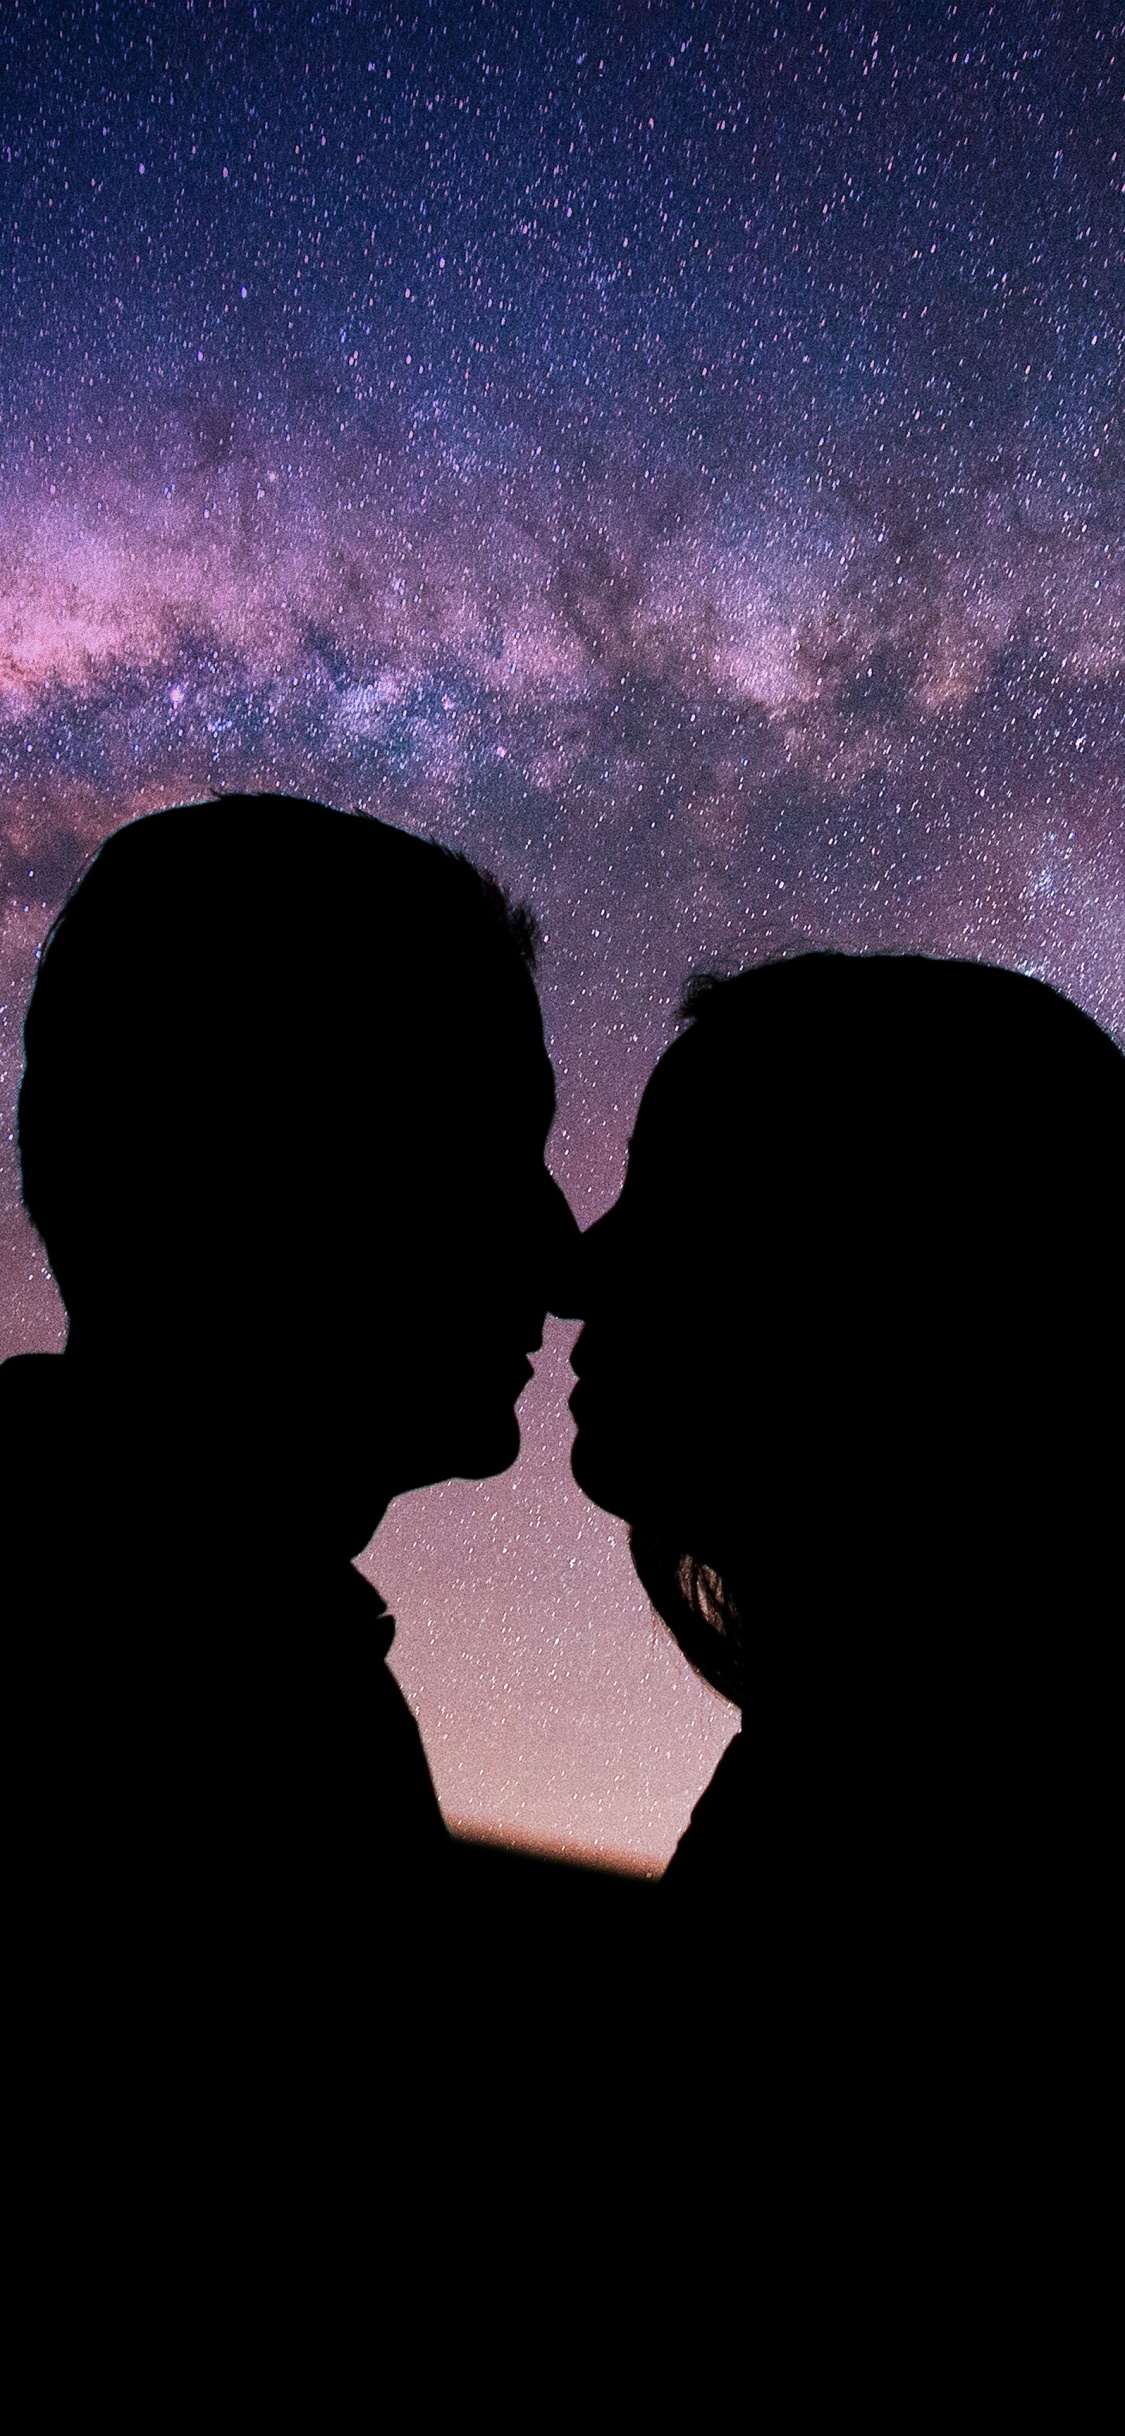 Amour, Nuit, Atmosphère, Interaction, Silhouette. Wallpaper in 1125x2436 Resolution